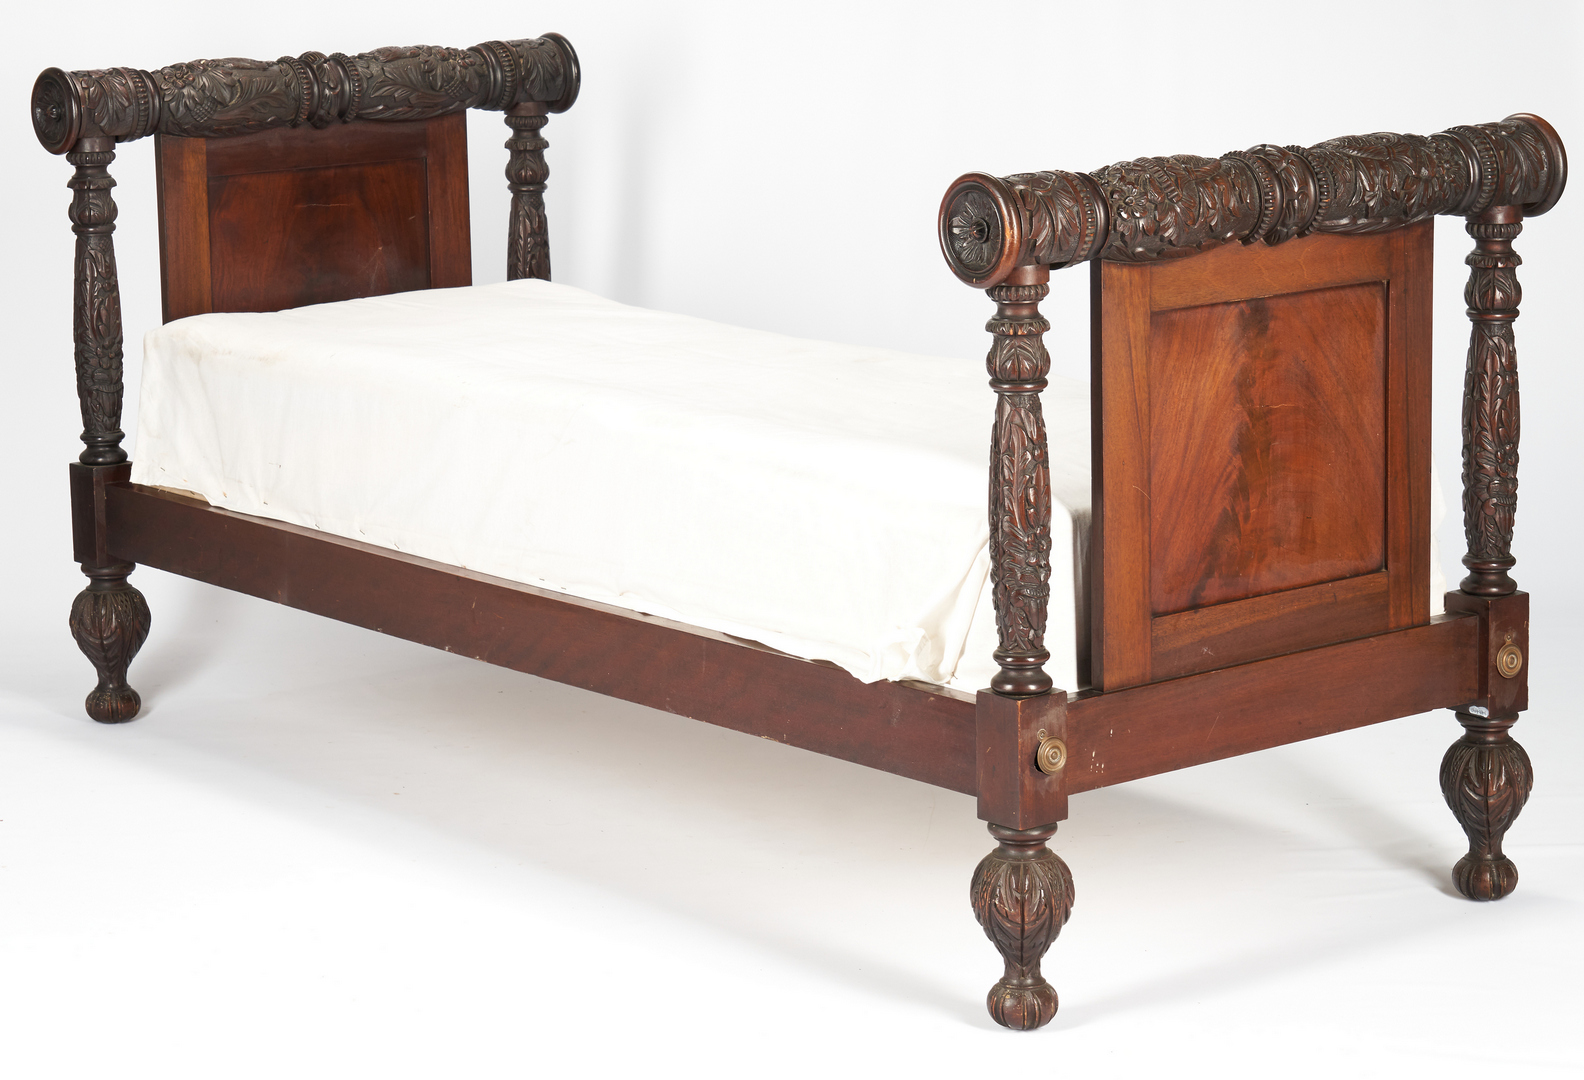 Lot 412: Classical Revival Carved Daybed